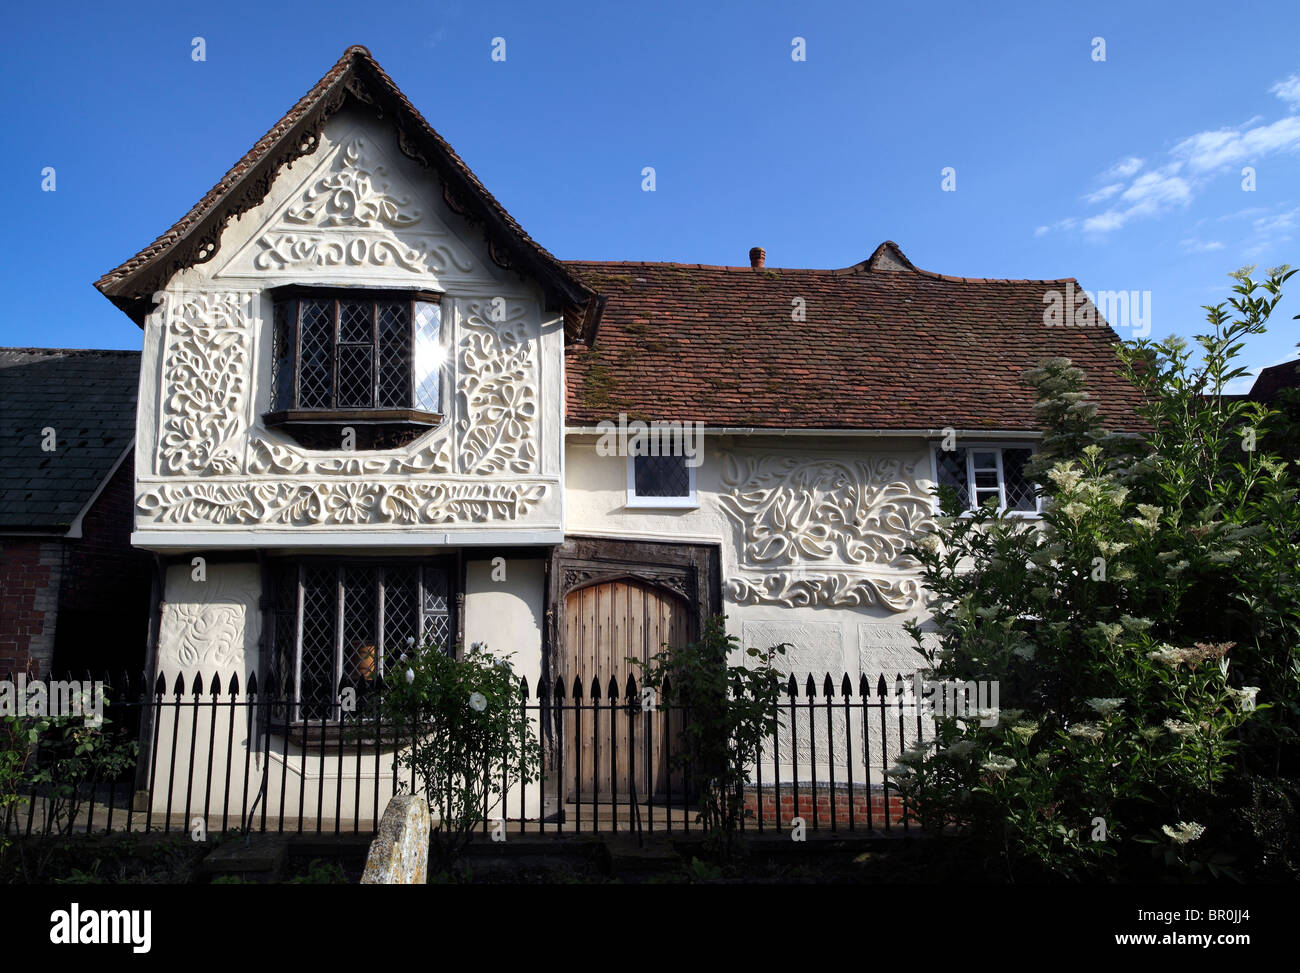 Midsummer evening sunlight highlights pargetting on the restored Ancient House, Clare, Suffolk. Stock Photo